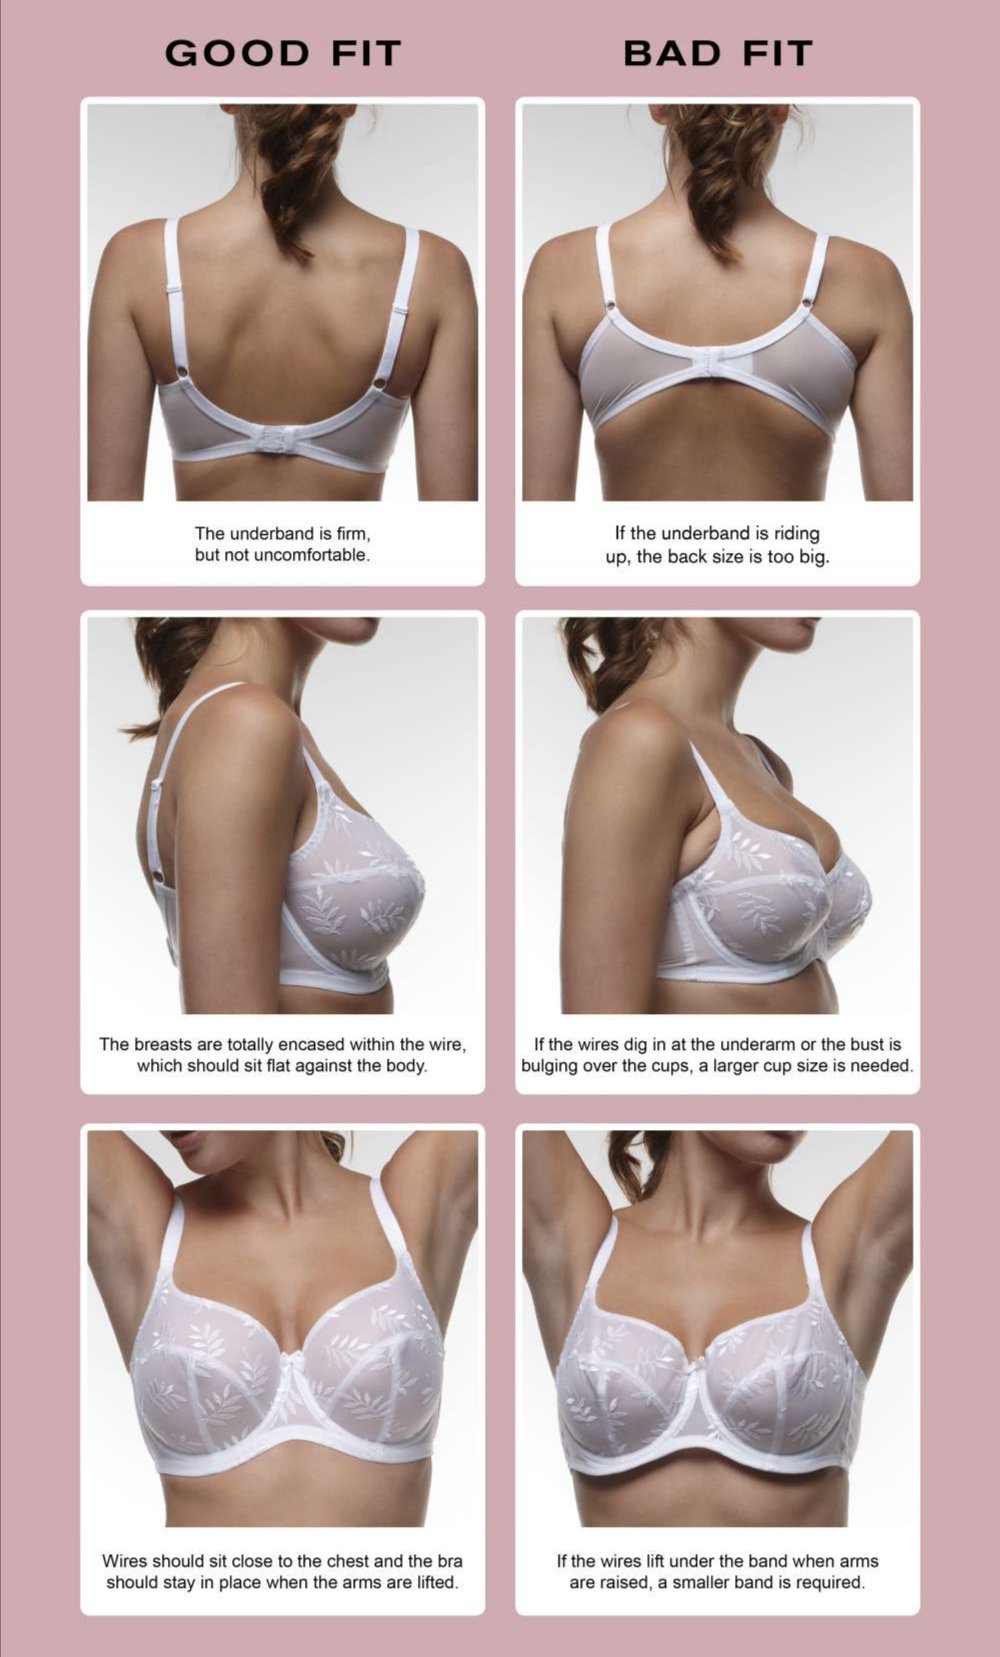 7 Signs You're Wearing the Wrong Bra Size—and How to Find One That